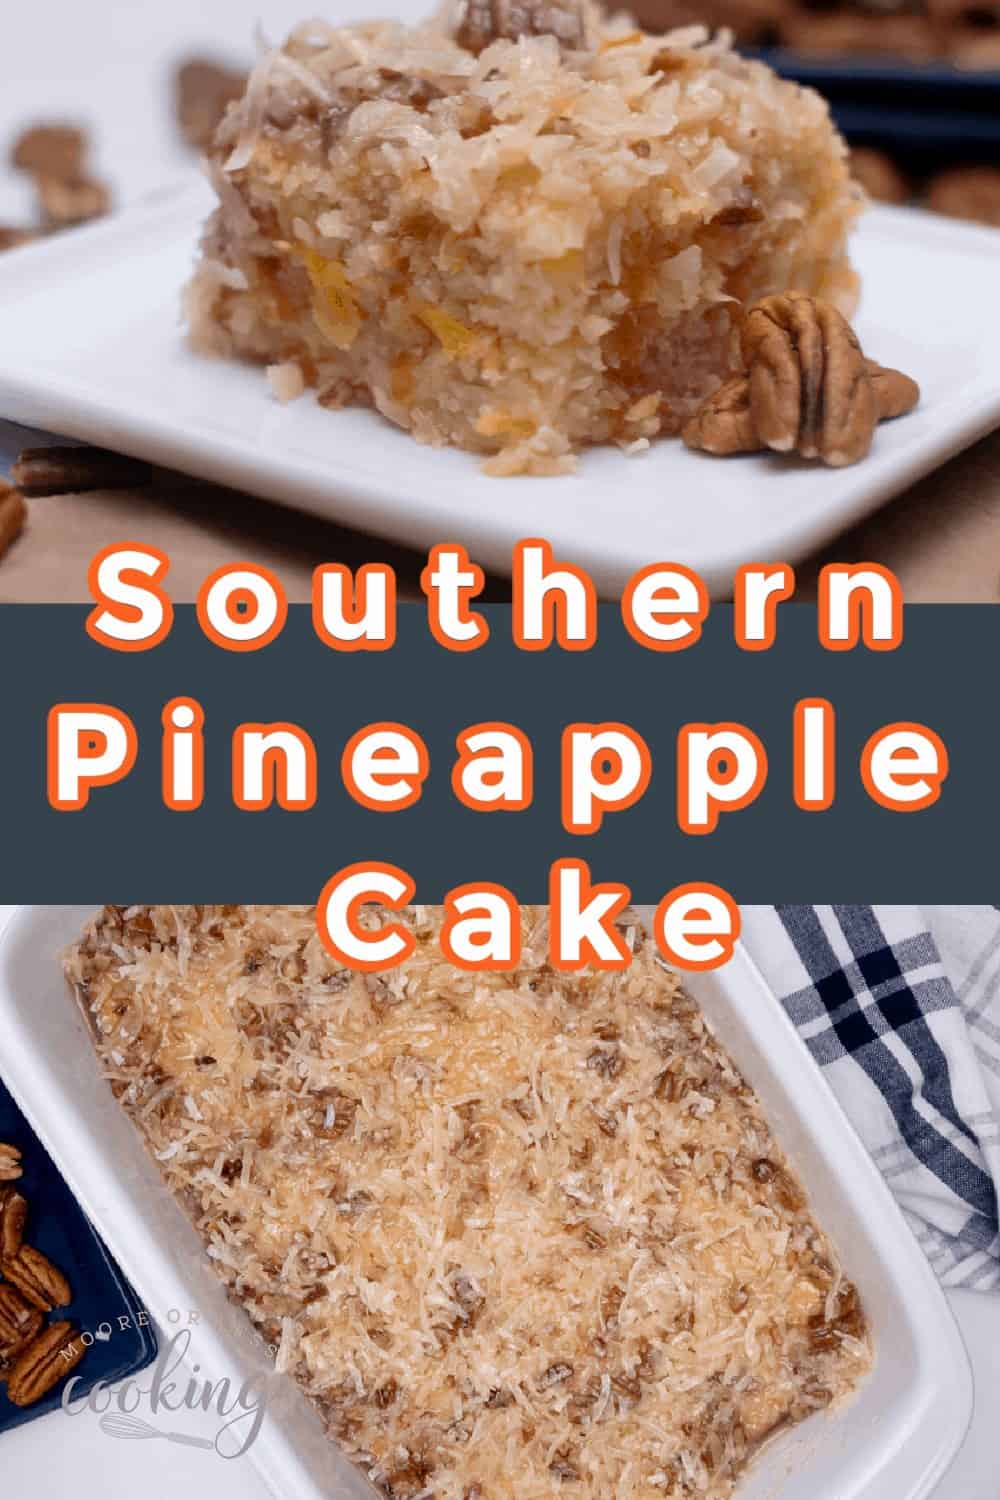 Southern Pineapple Cake is amazingly moist and delicious. It's so easy to make and even easier to eat! A simple, moist from scratch pineapple cake studded with pecans and coconut.  via @Mooreorlesscook